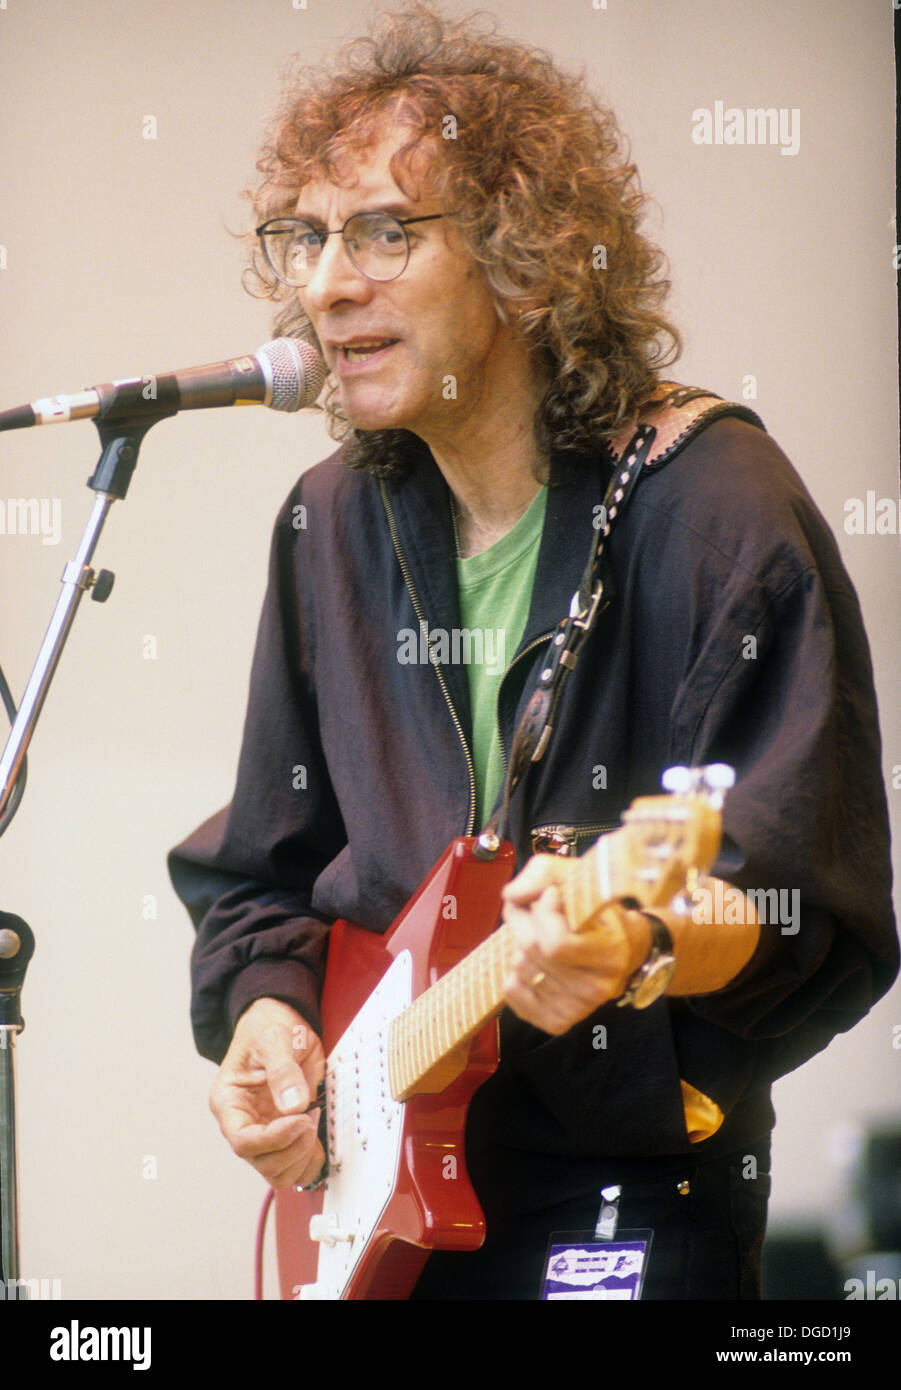 Albert lee guitarist hi-res stock photography and images - Alamy